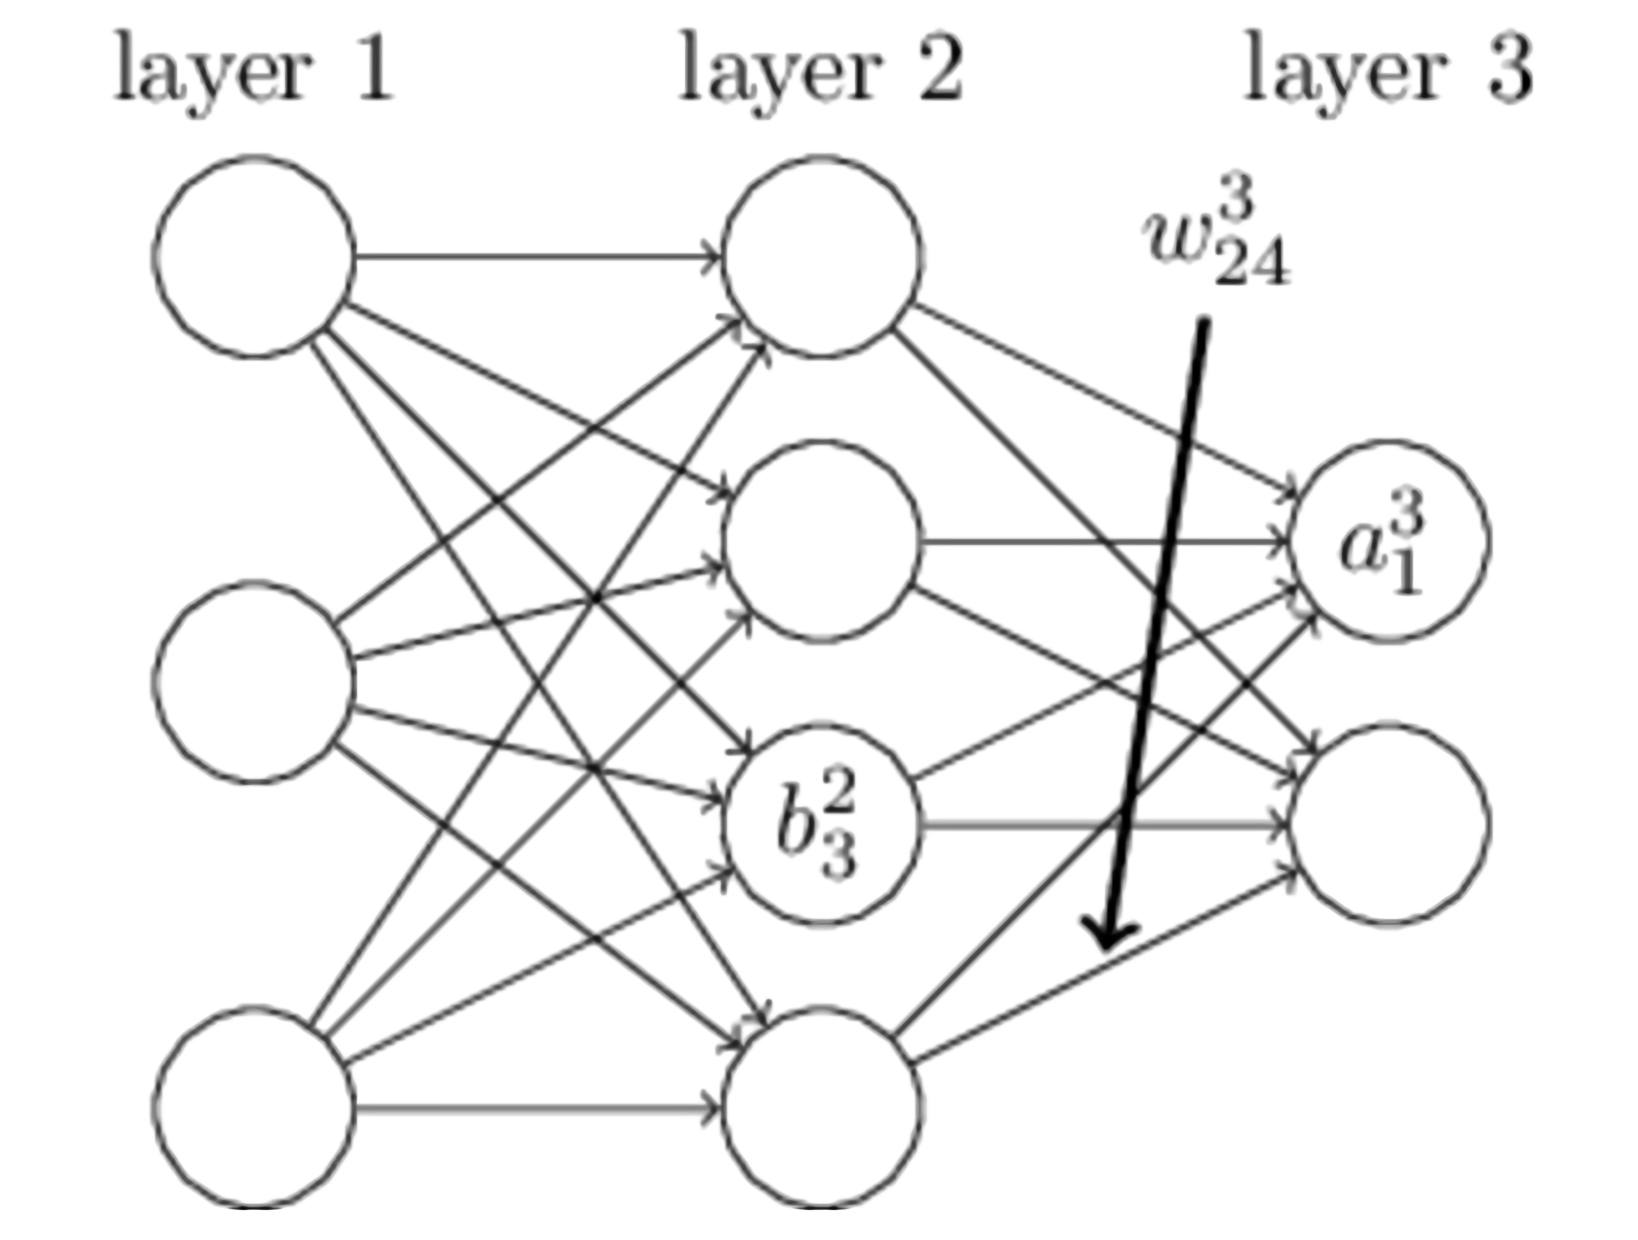 An example of a simple neural network